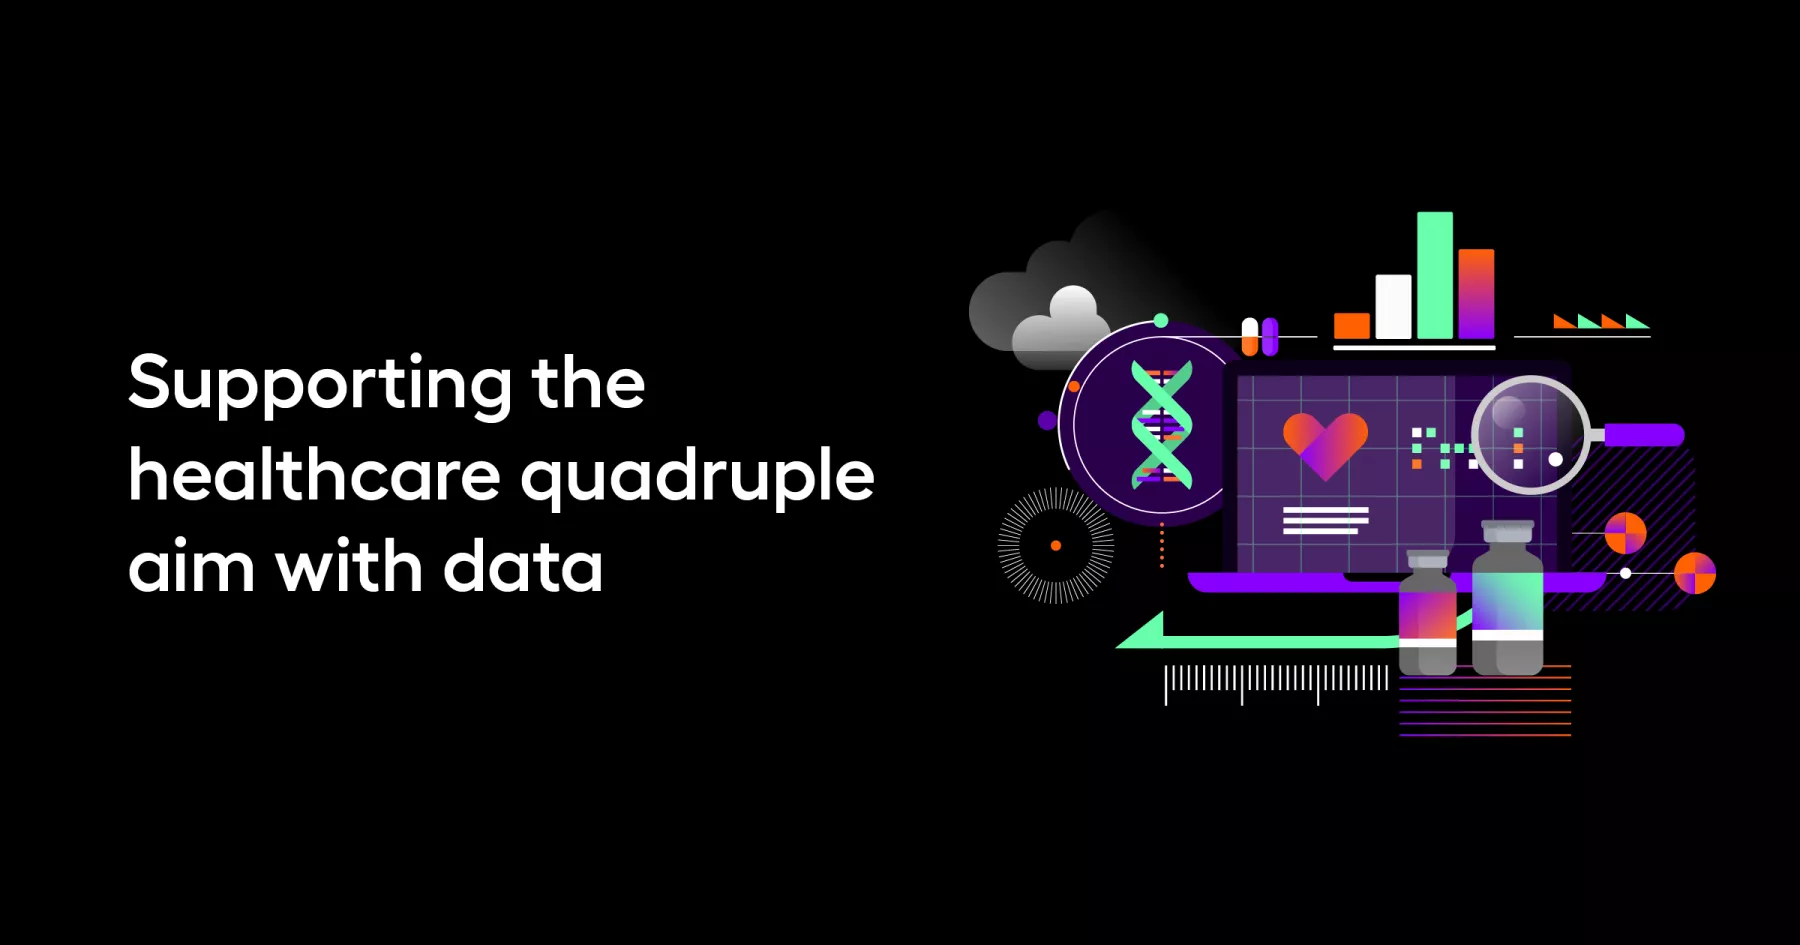 Supporting the healthcare quadruple aim with data